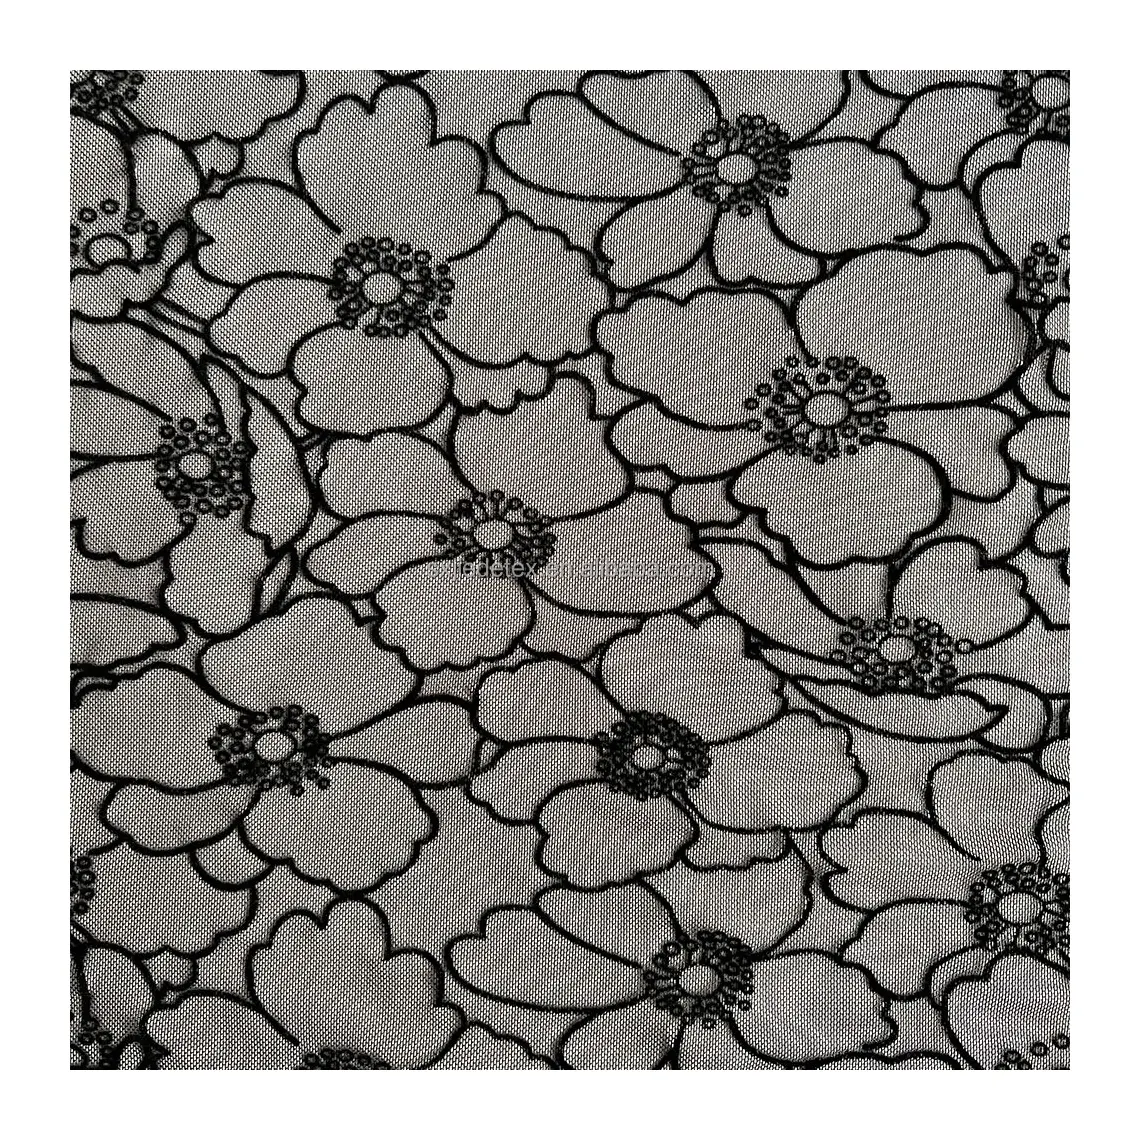 Eco-friendly China Factory Vintage Floral Warp Knitted Breathable Paisley Upholstery Lace Black Flock Fabric for Dress